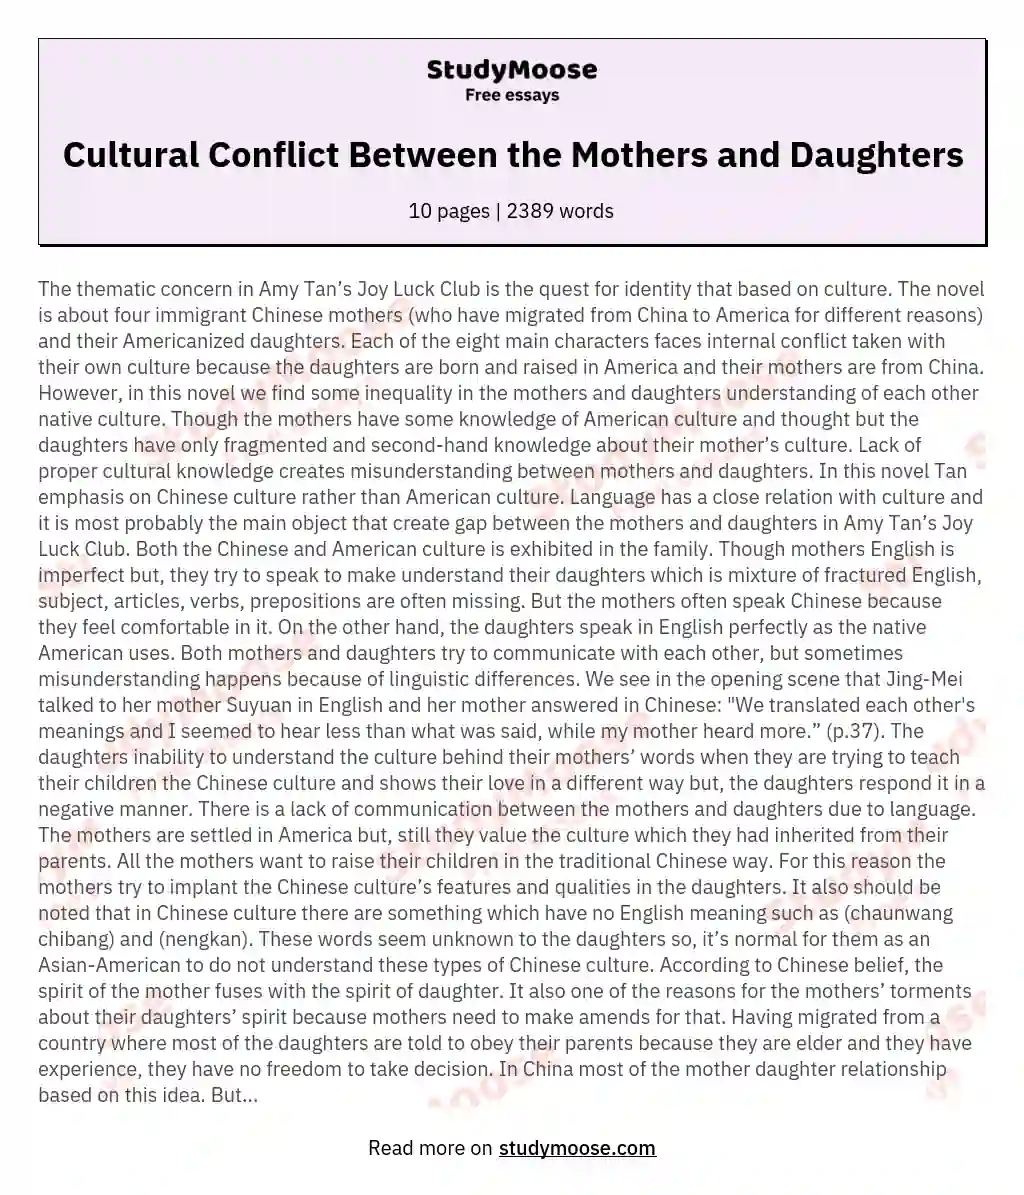 Cultural Conflict Between the Mothers and Daughters essay